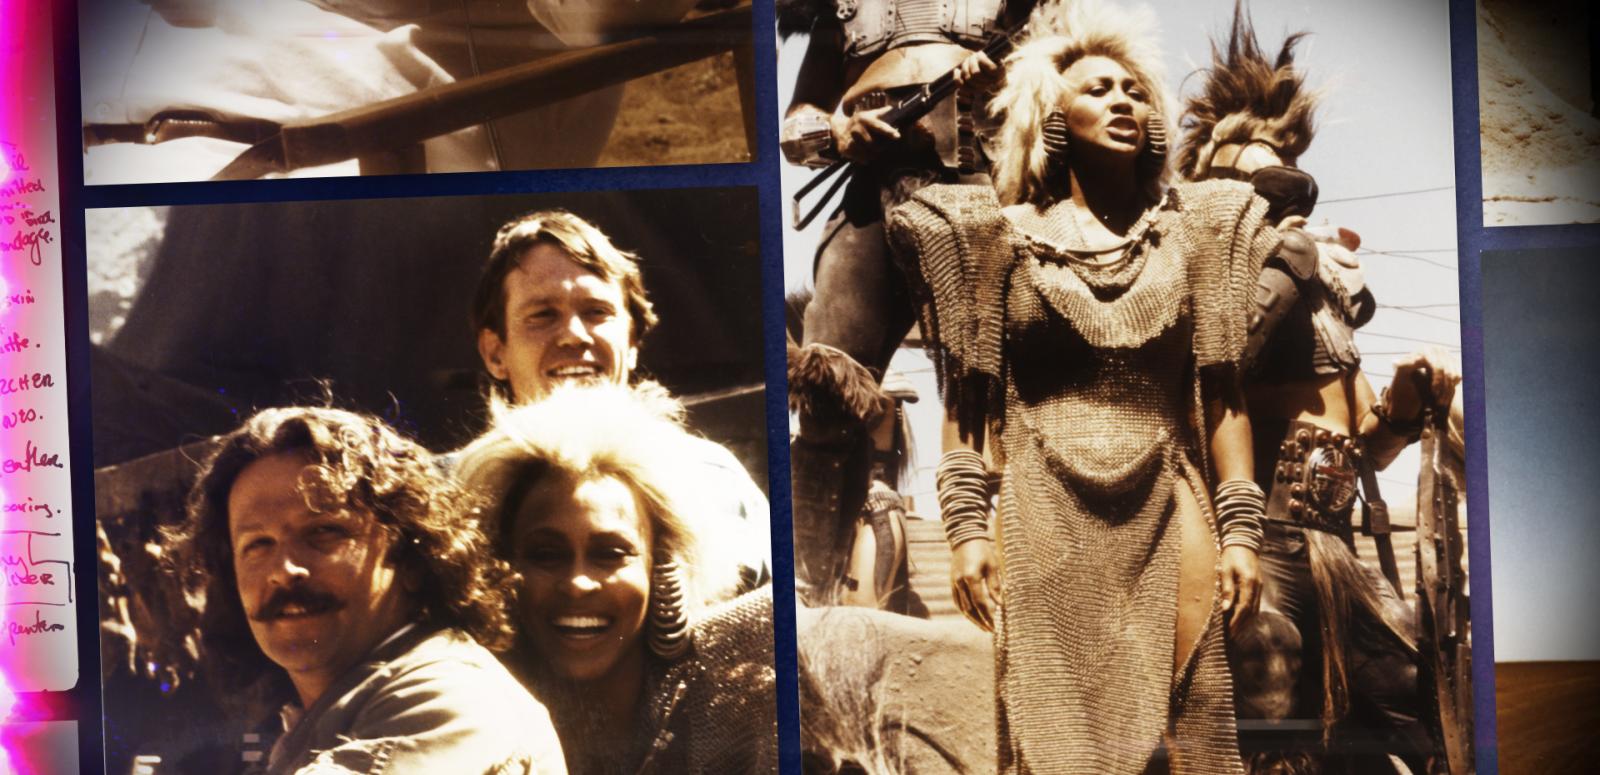 Images from the making of the movie Mad Max Beyond Thunderdome, featuring director George Miller and actress Tina Turner in costume as Aunty Entity